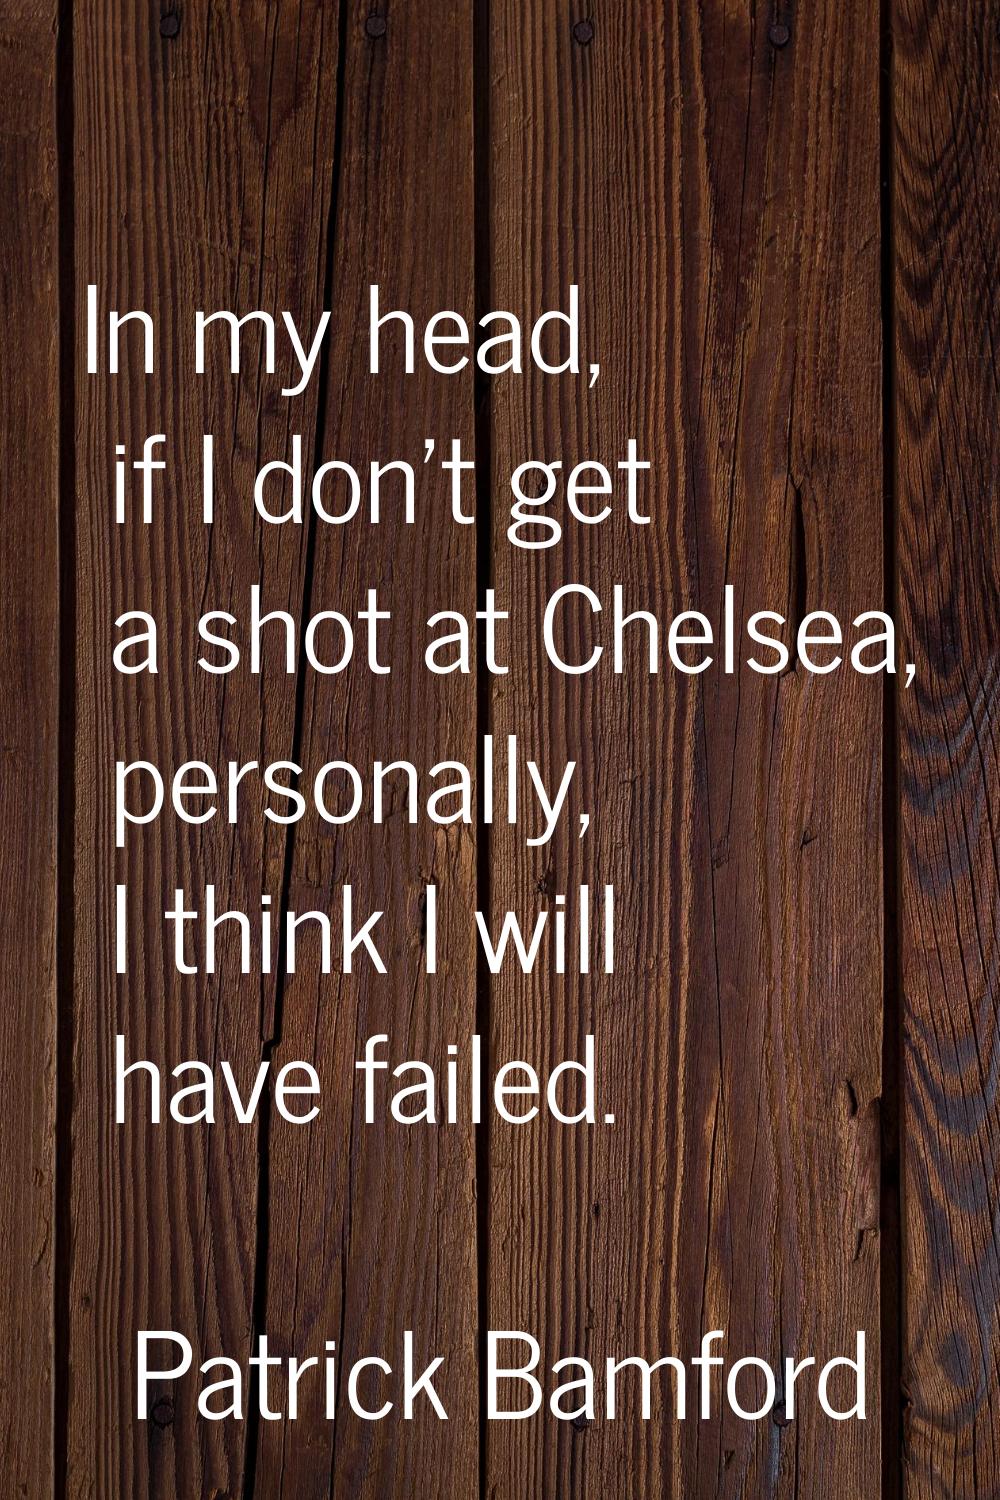 In my head, if I don't get a shot at Chelsea, personally, I think I will have failed.